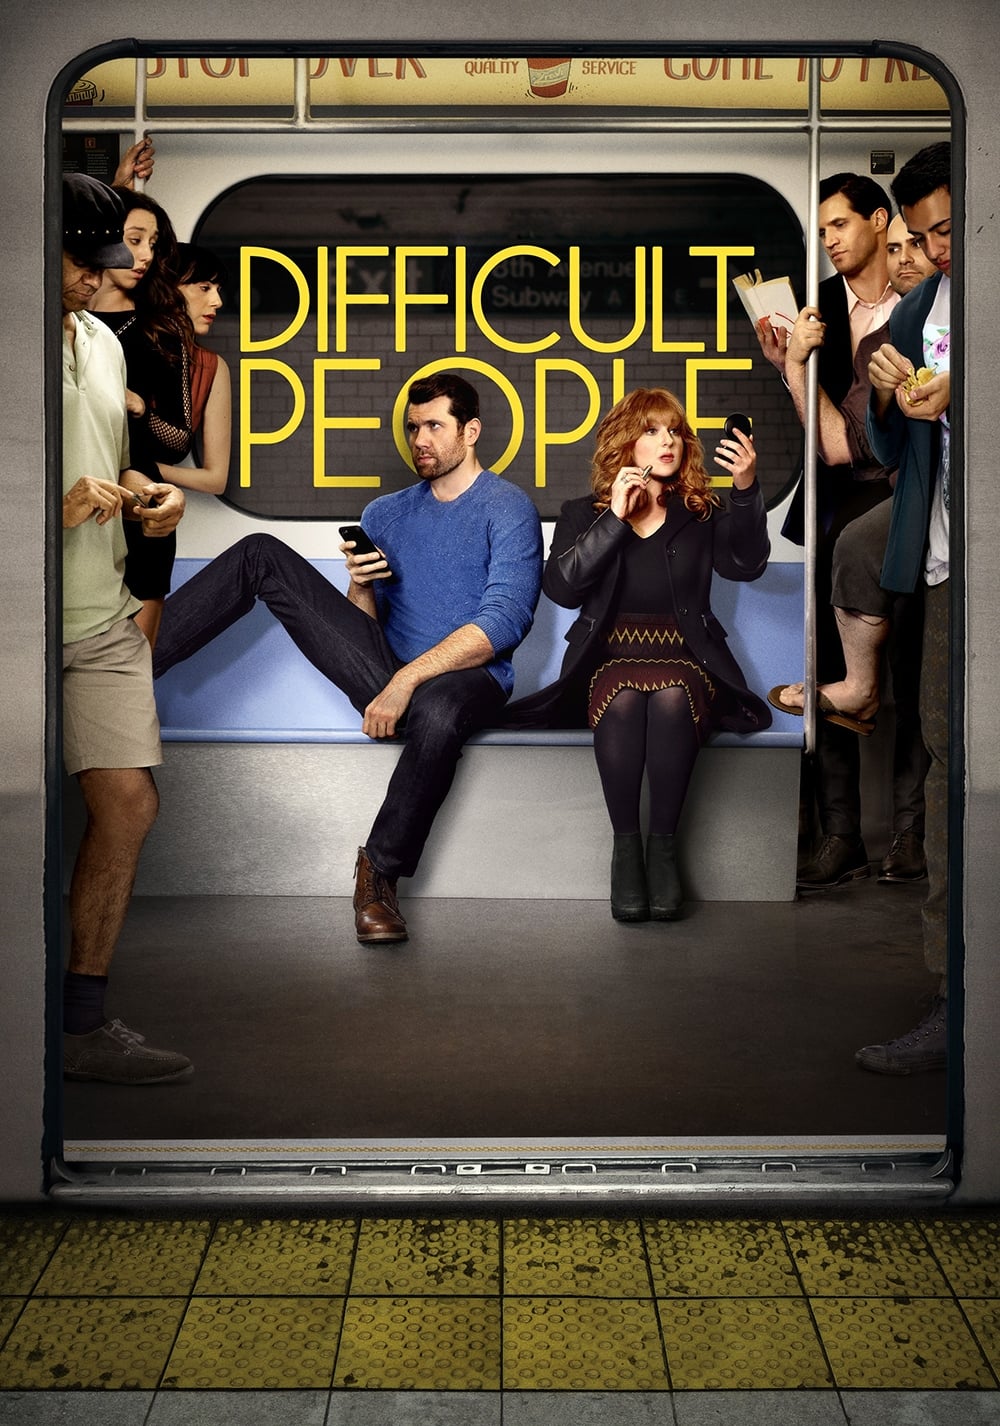 Difficult People (2015)